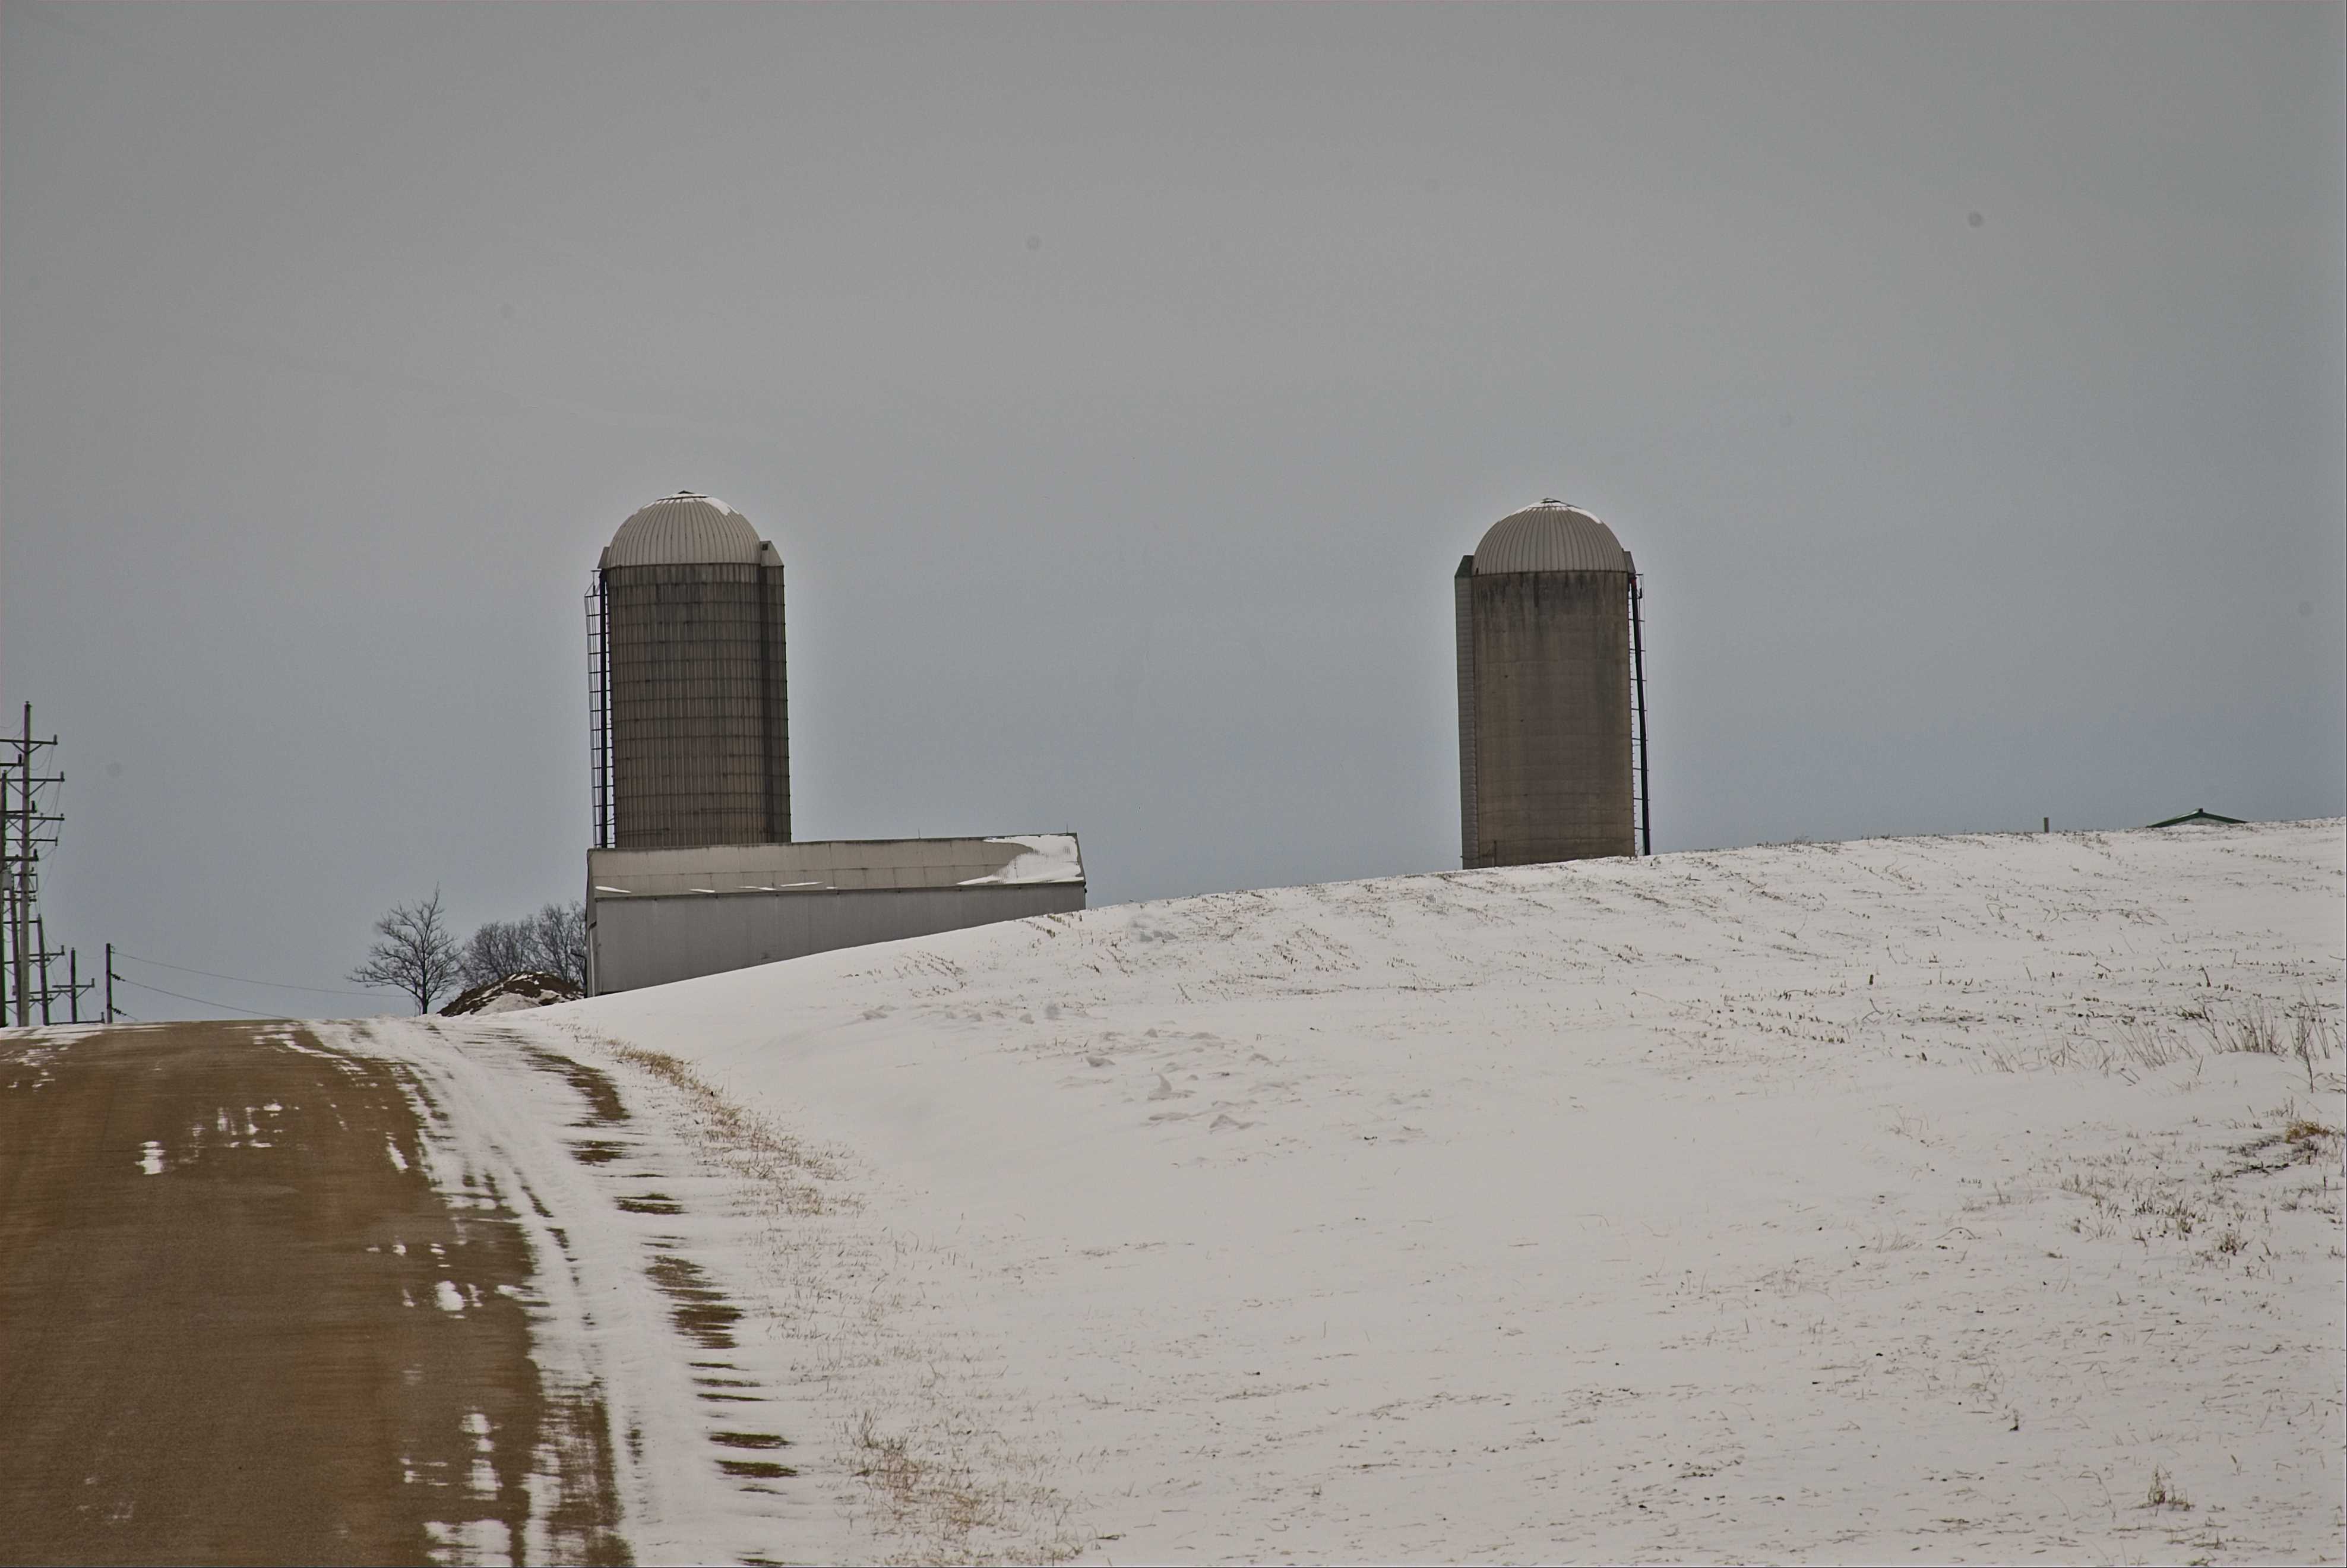 Silos waiting for a Warmer Day